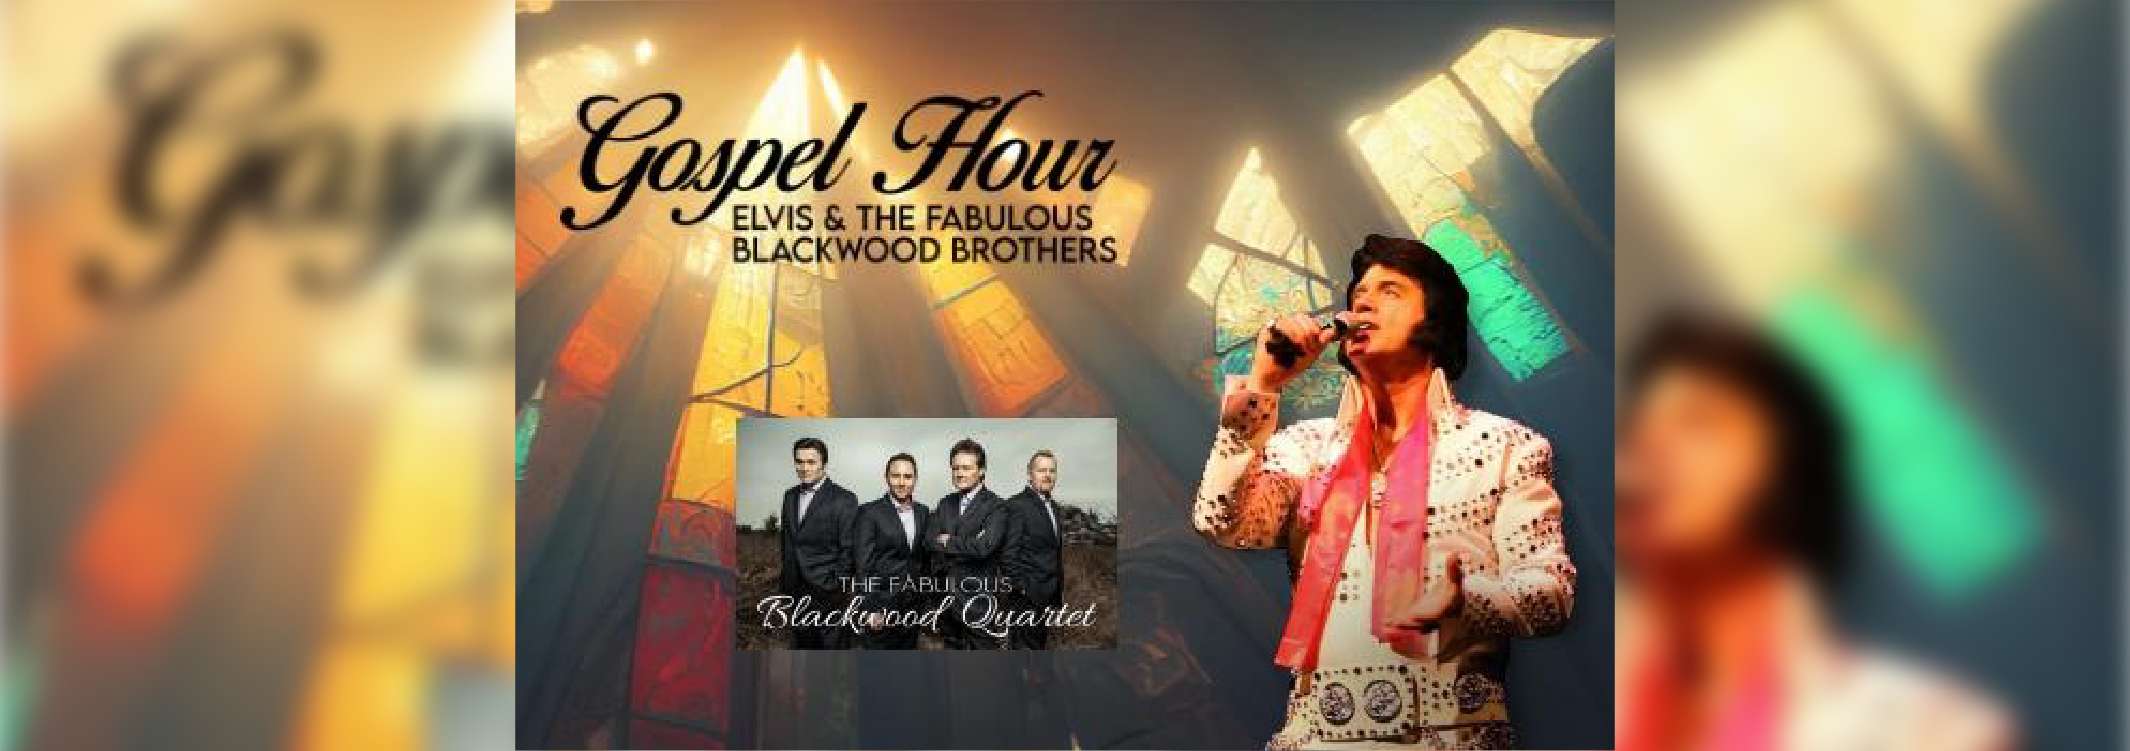 Gospel Hour with Elvis and The Fabulous Blackwoods